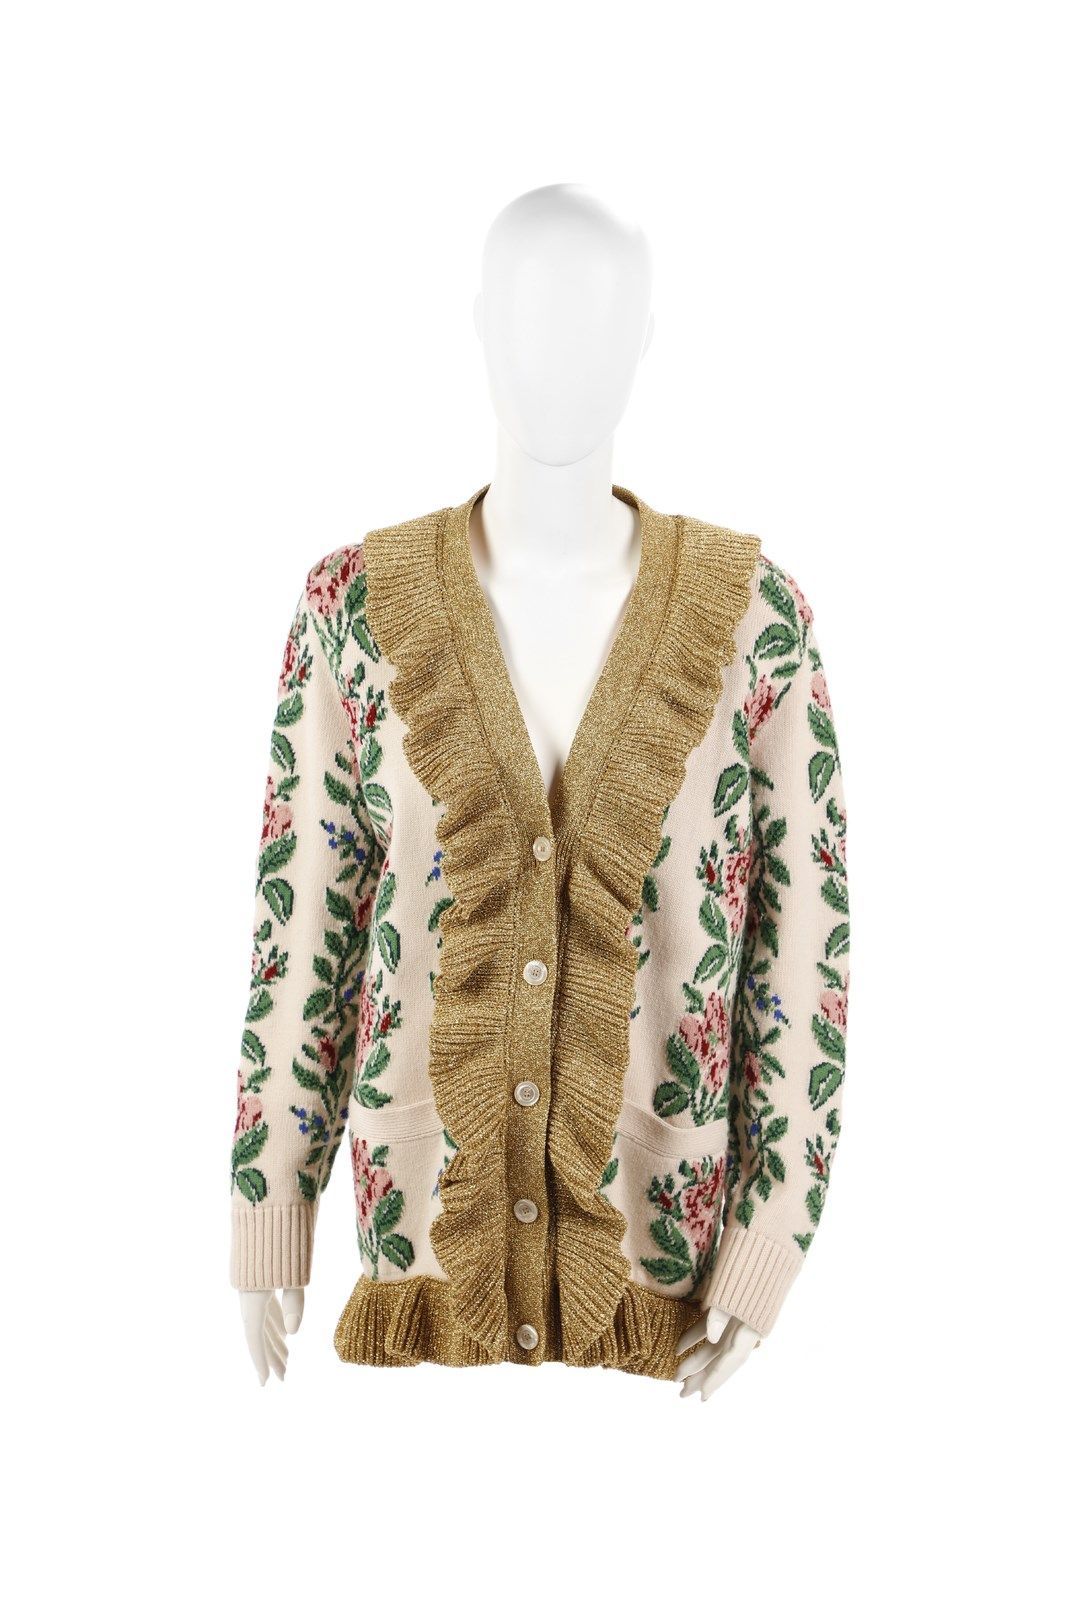 GUCCI Floral patterned cardigan in wool. Interior in printed silk. 2000's. Cardi&hellip;